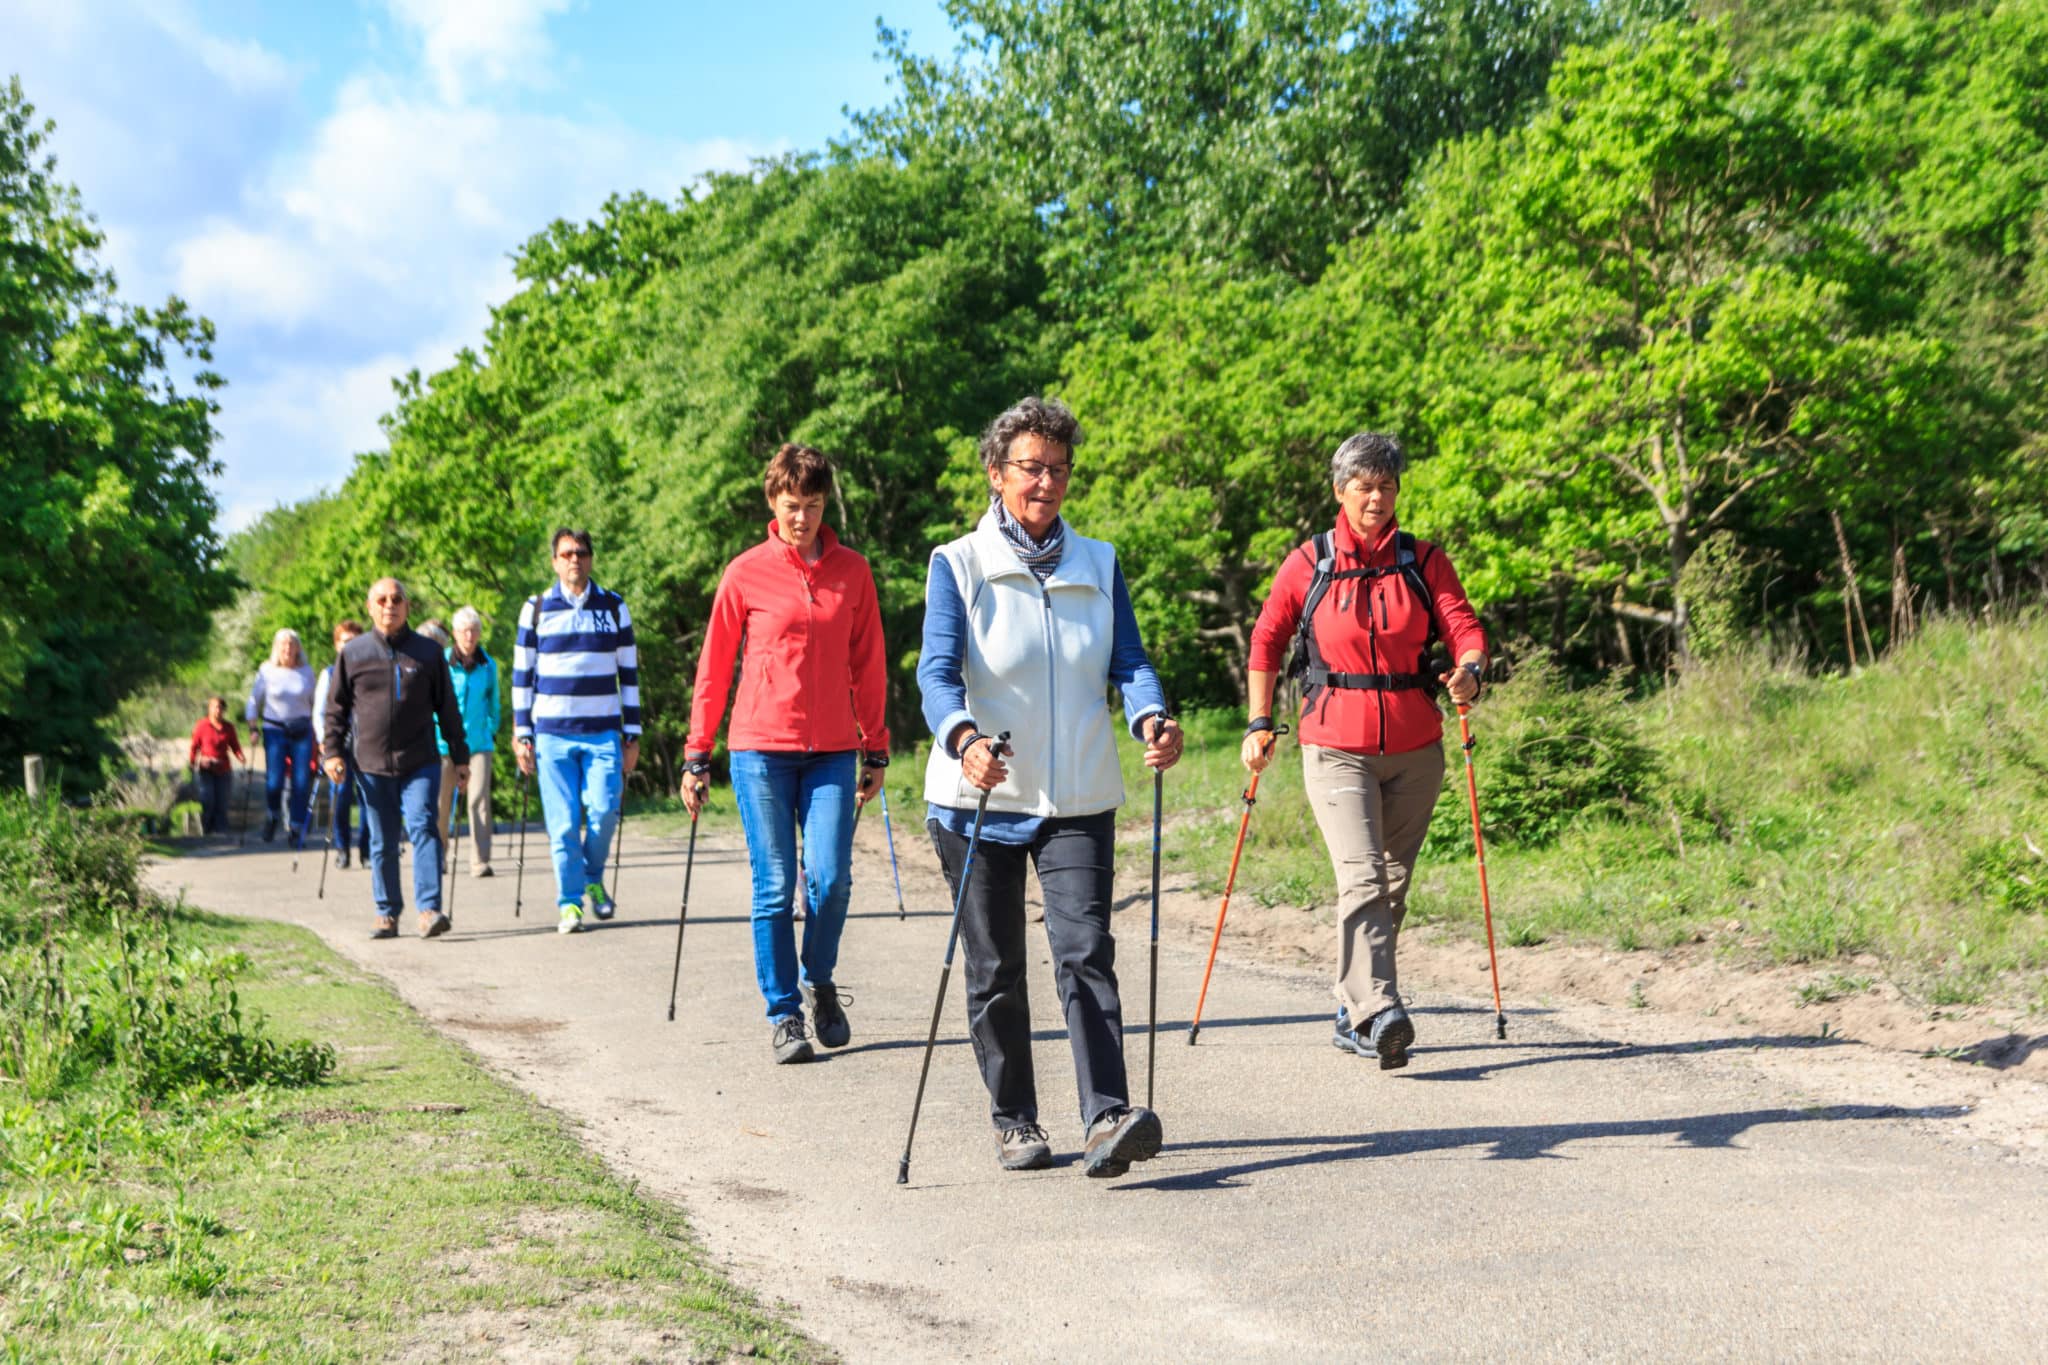 Group on walkers on trail doing low impact exercise